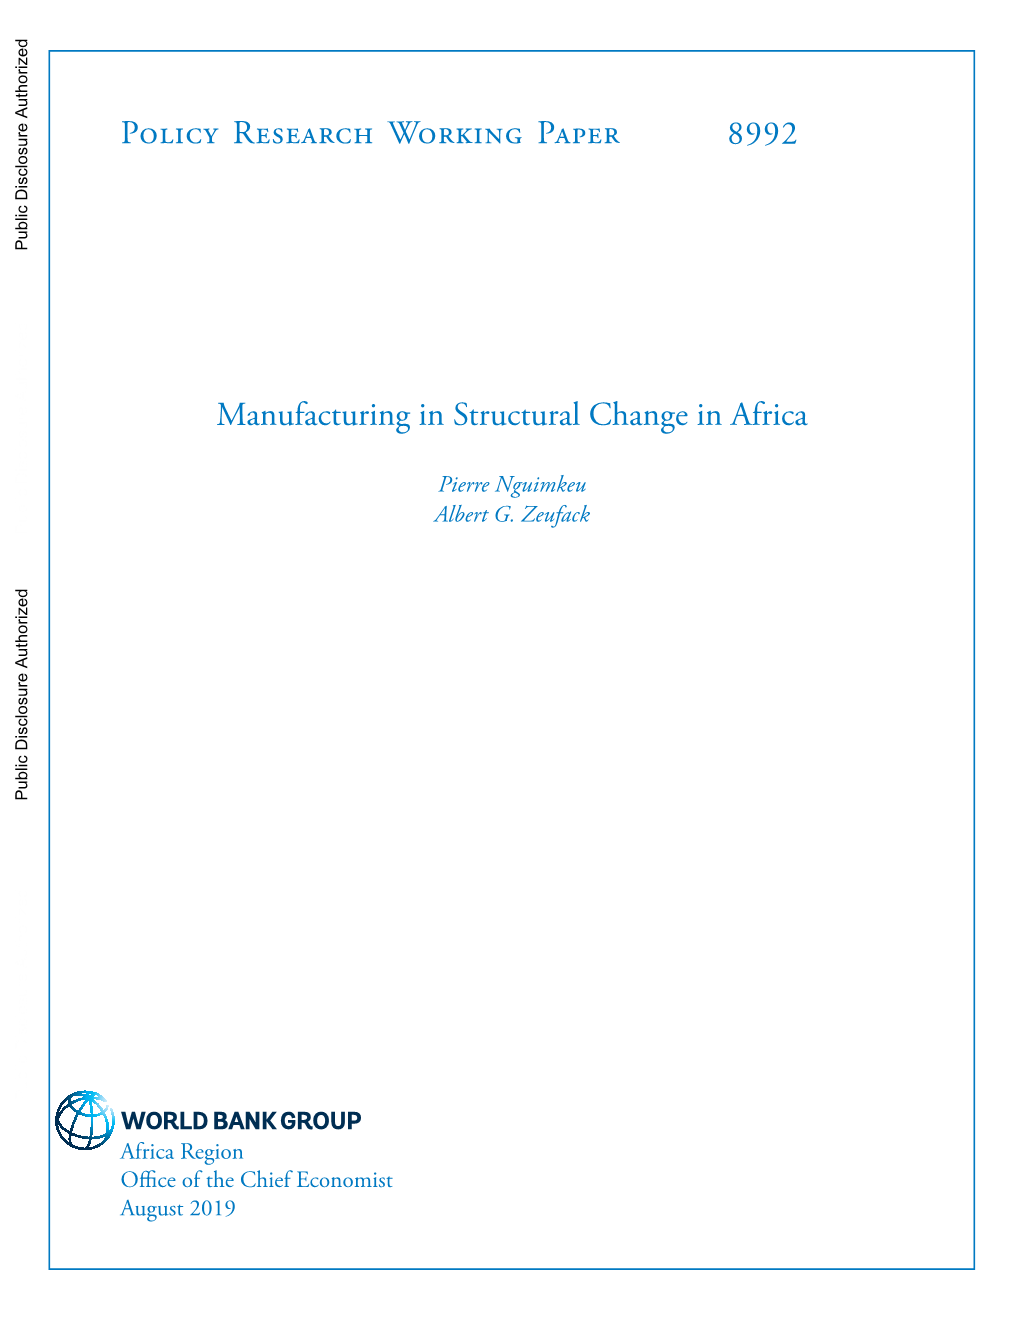 Policy Research Working Paper 8992 Manufacturing in Structural Change